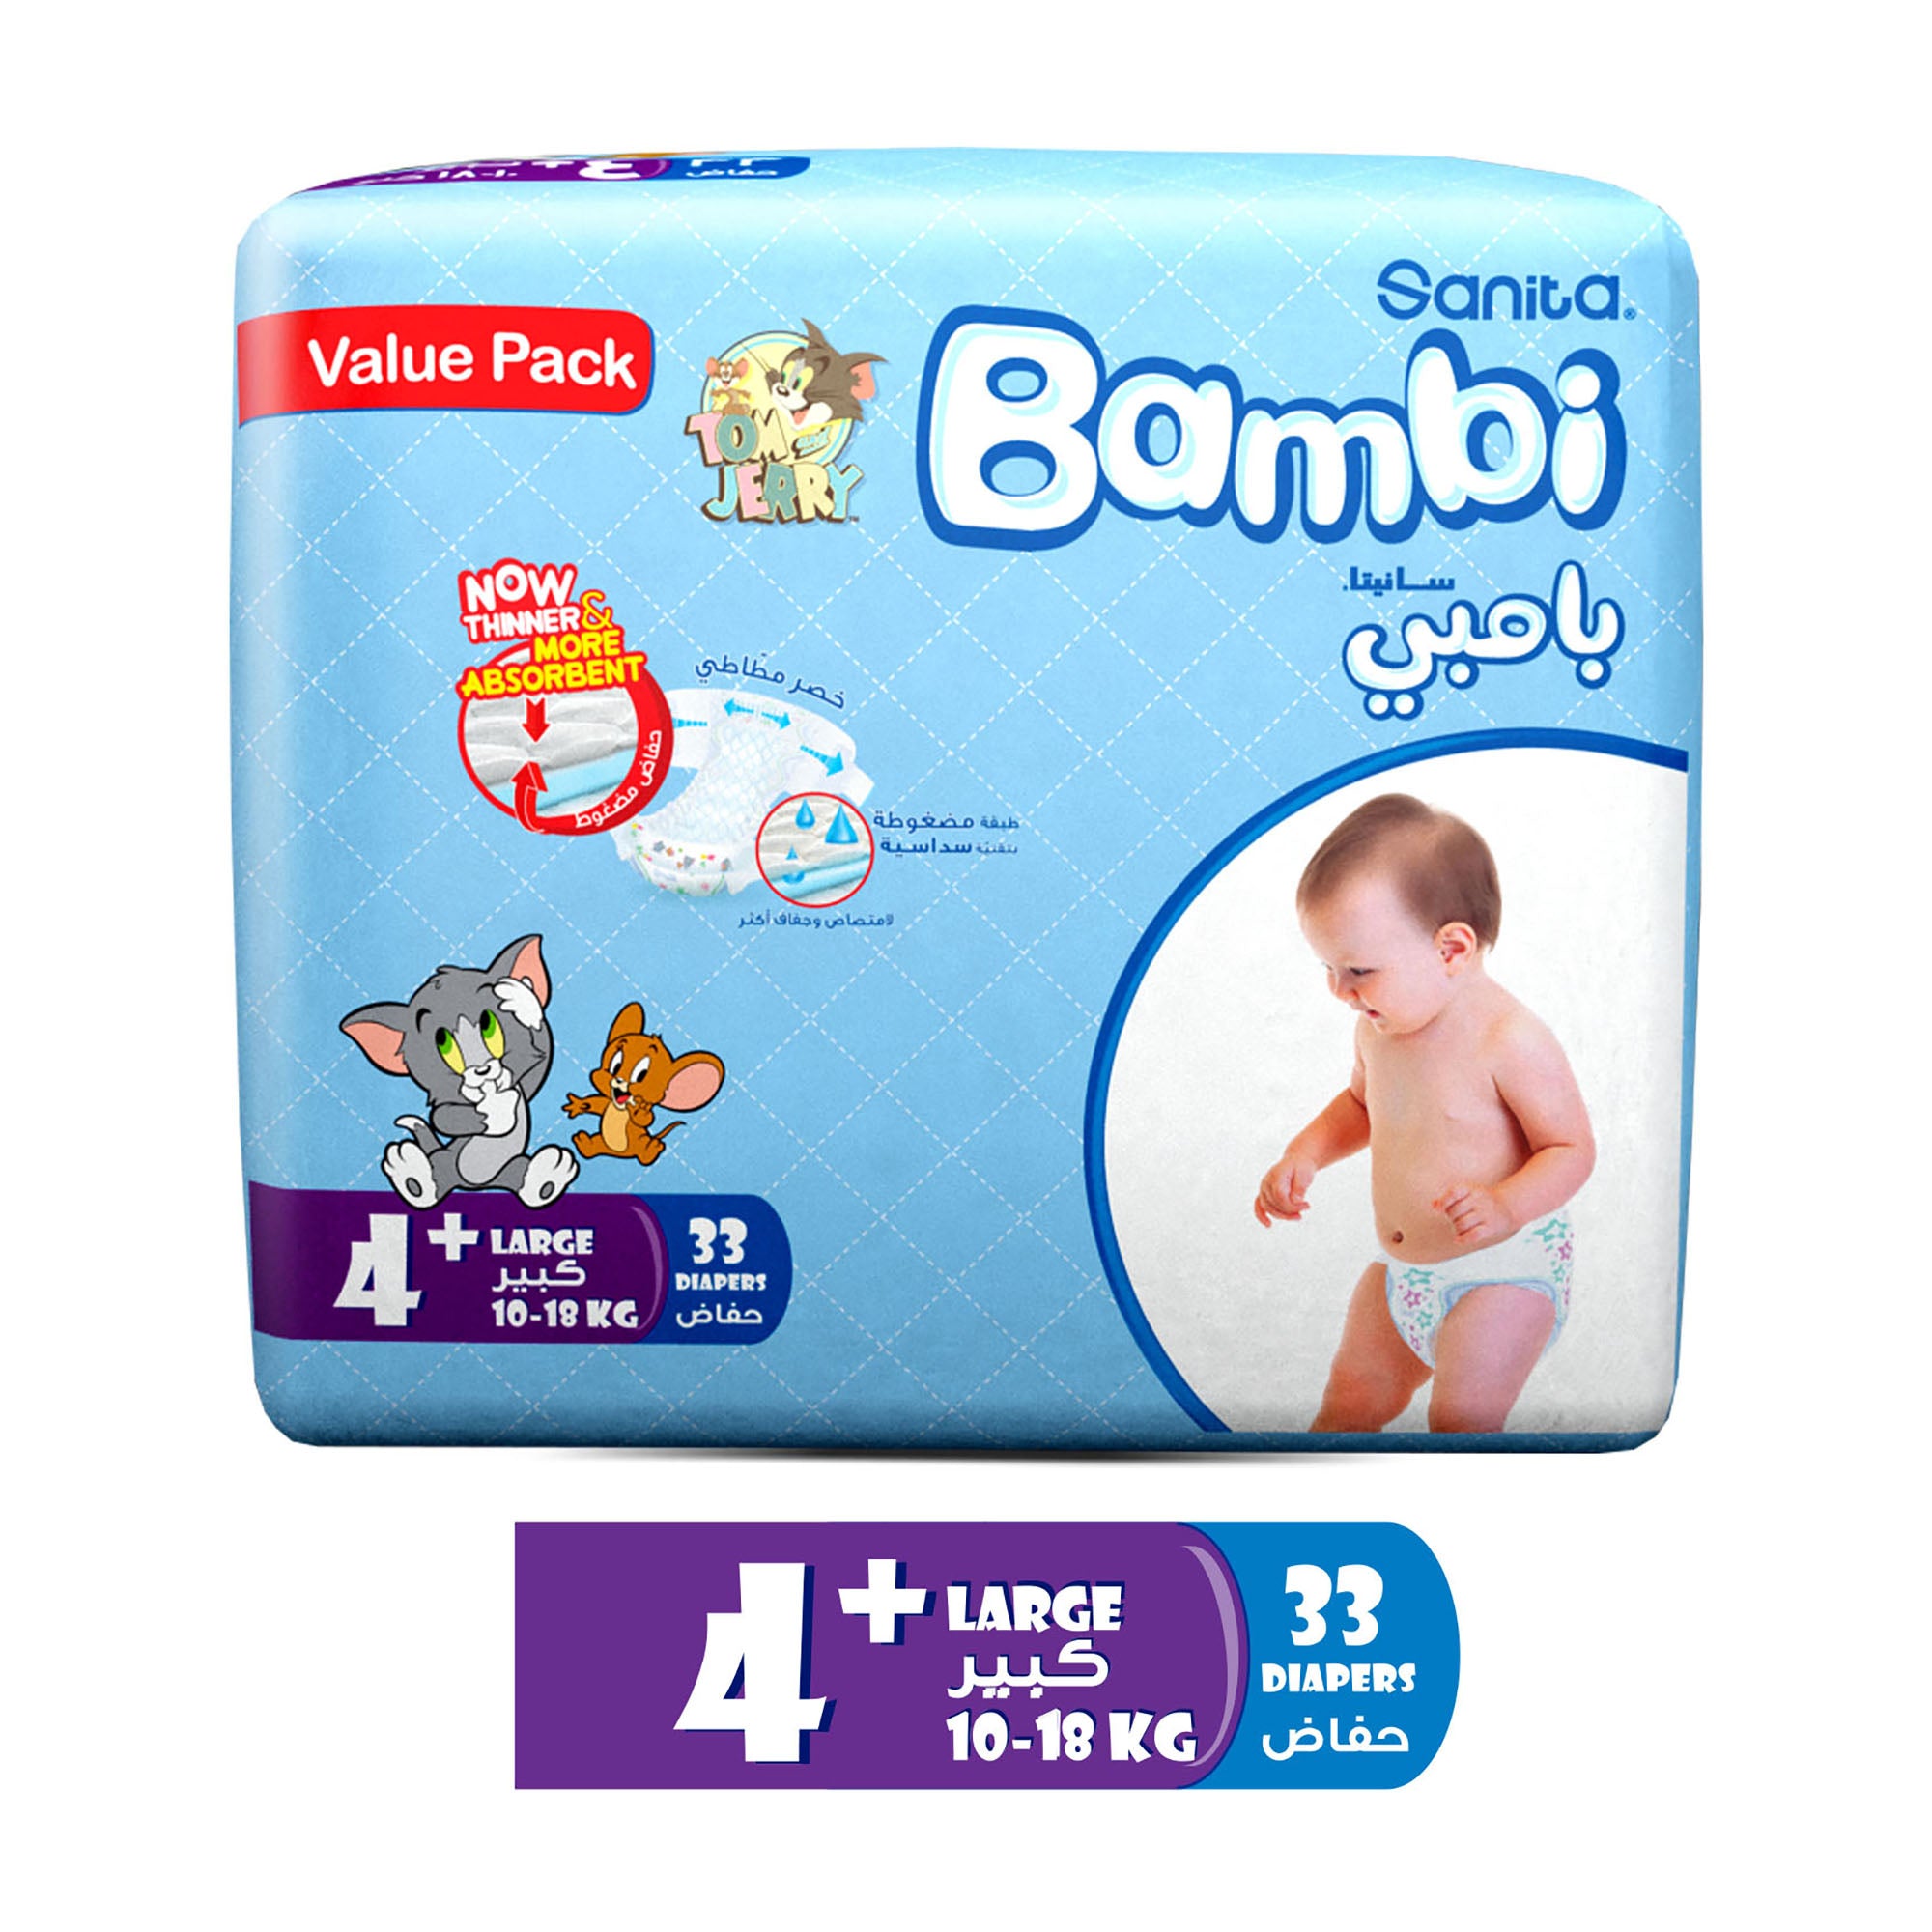 Bambi Baby Diapers Value Pack Size 4+, Large plus, 10-18 kg - 33's